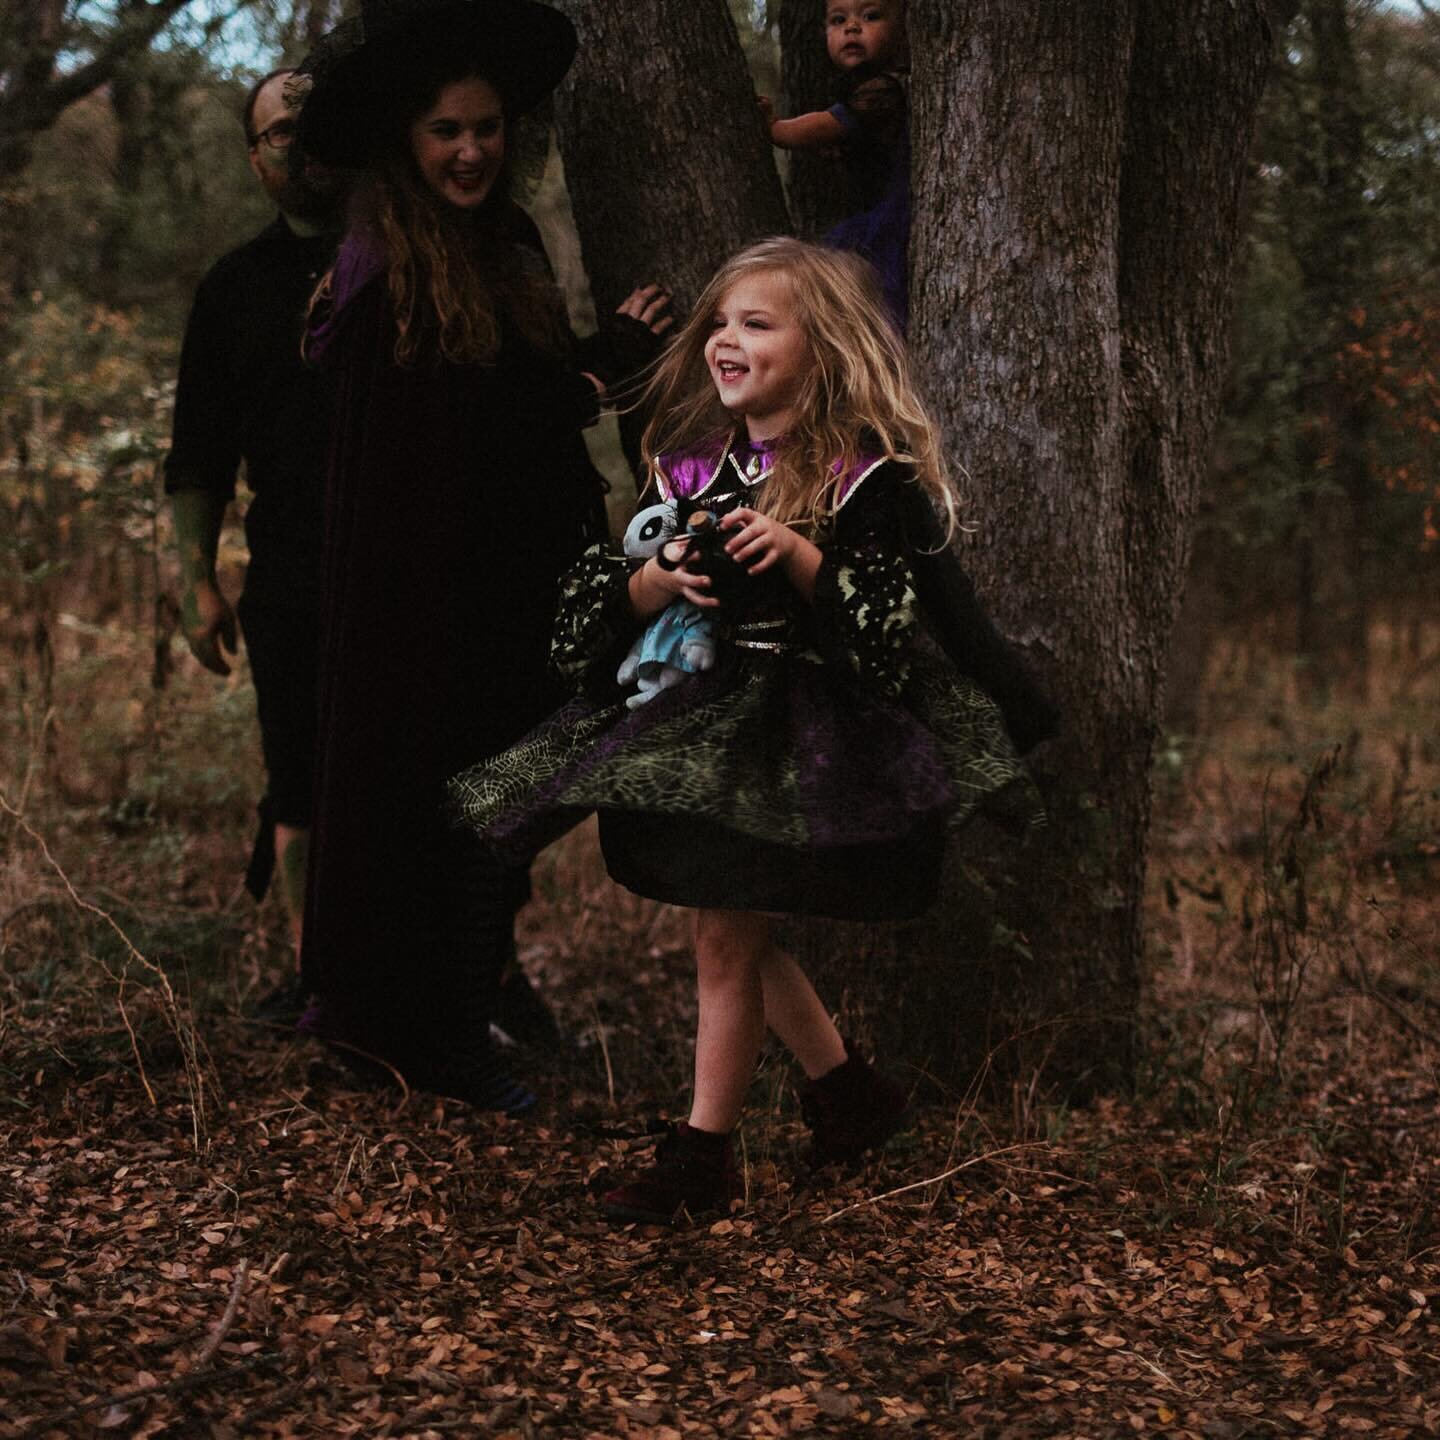 It&rsquo;s all a bunch of ✨hocus pocus✨

Can we all just collectively agree that everyone needs Halloween costumes for their family photos? Yes? Perfect.
.
.
.
.
.
#wylietx #wyliephotographer #planophotographer #dallasfamilyphotographer #halloweencos